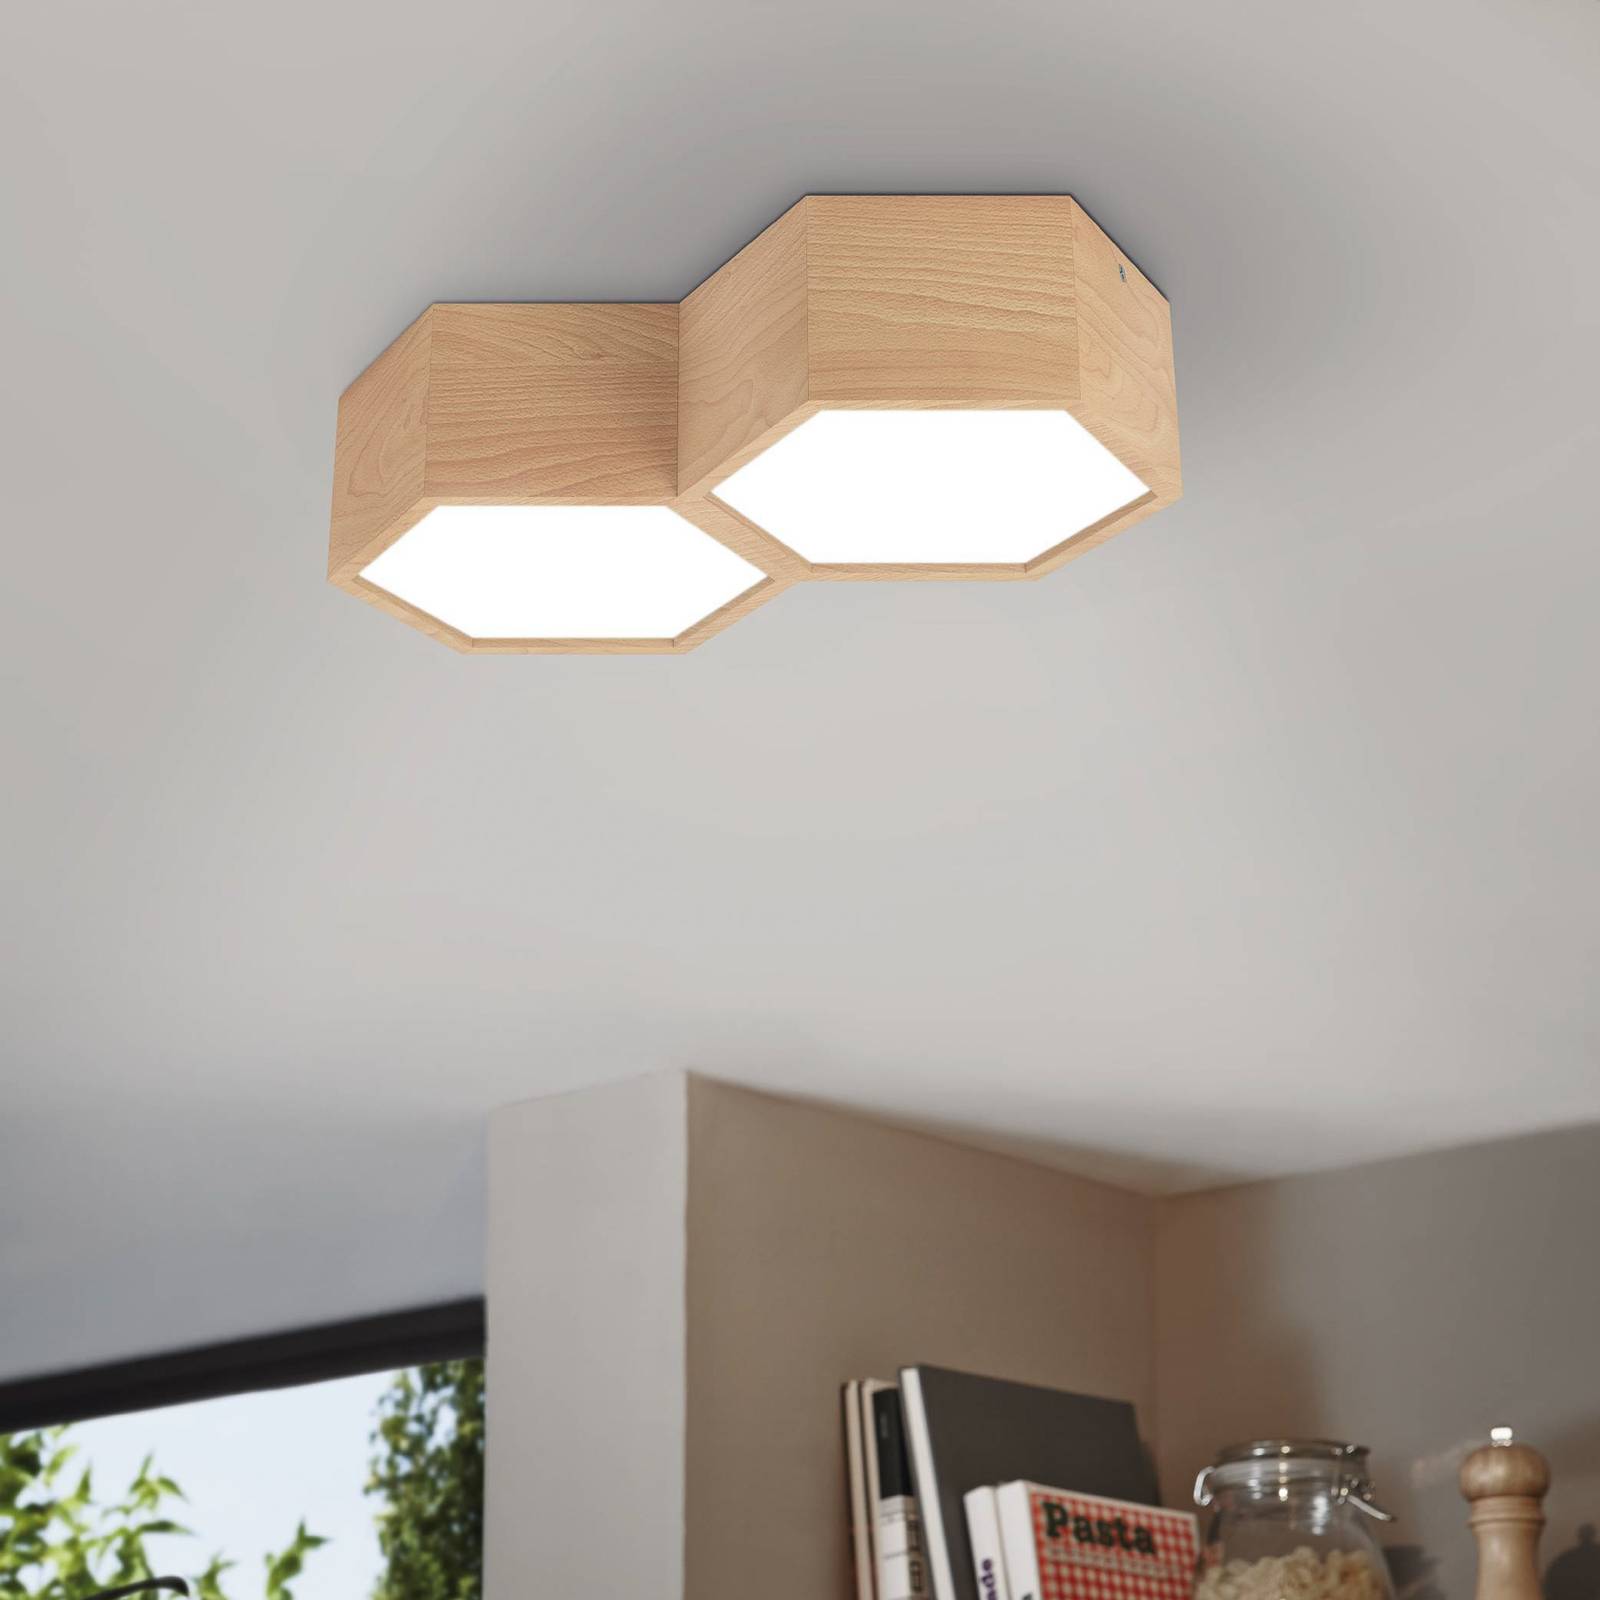 Photos - Chandelier / Lamp EGLO Mirlas ceiling light made of wood, 2-bulb 